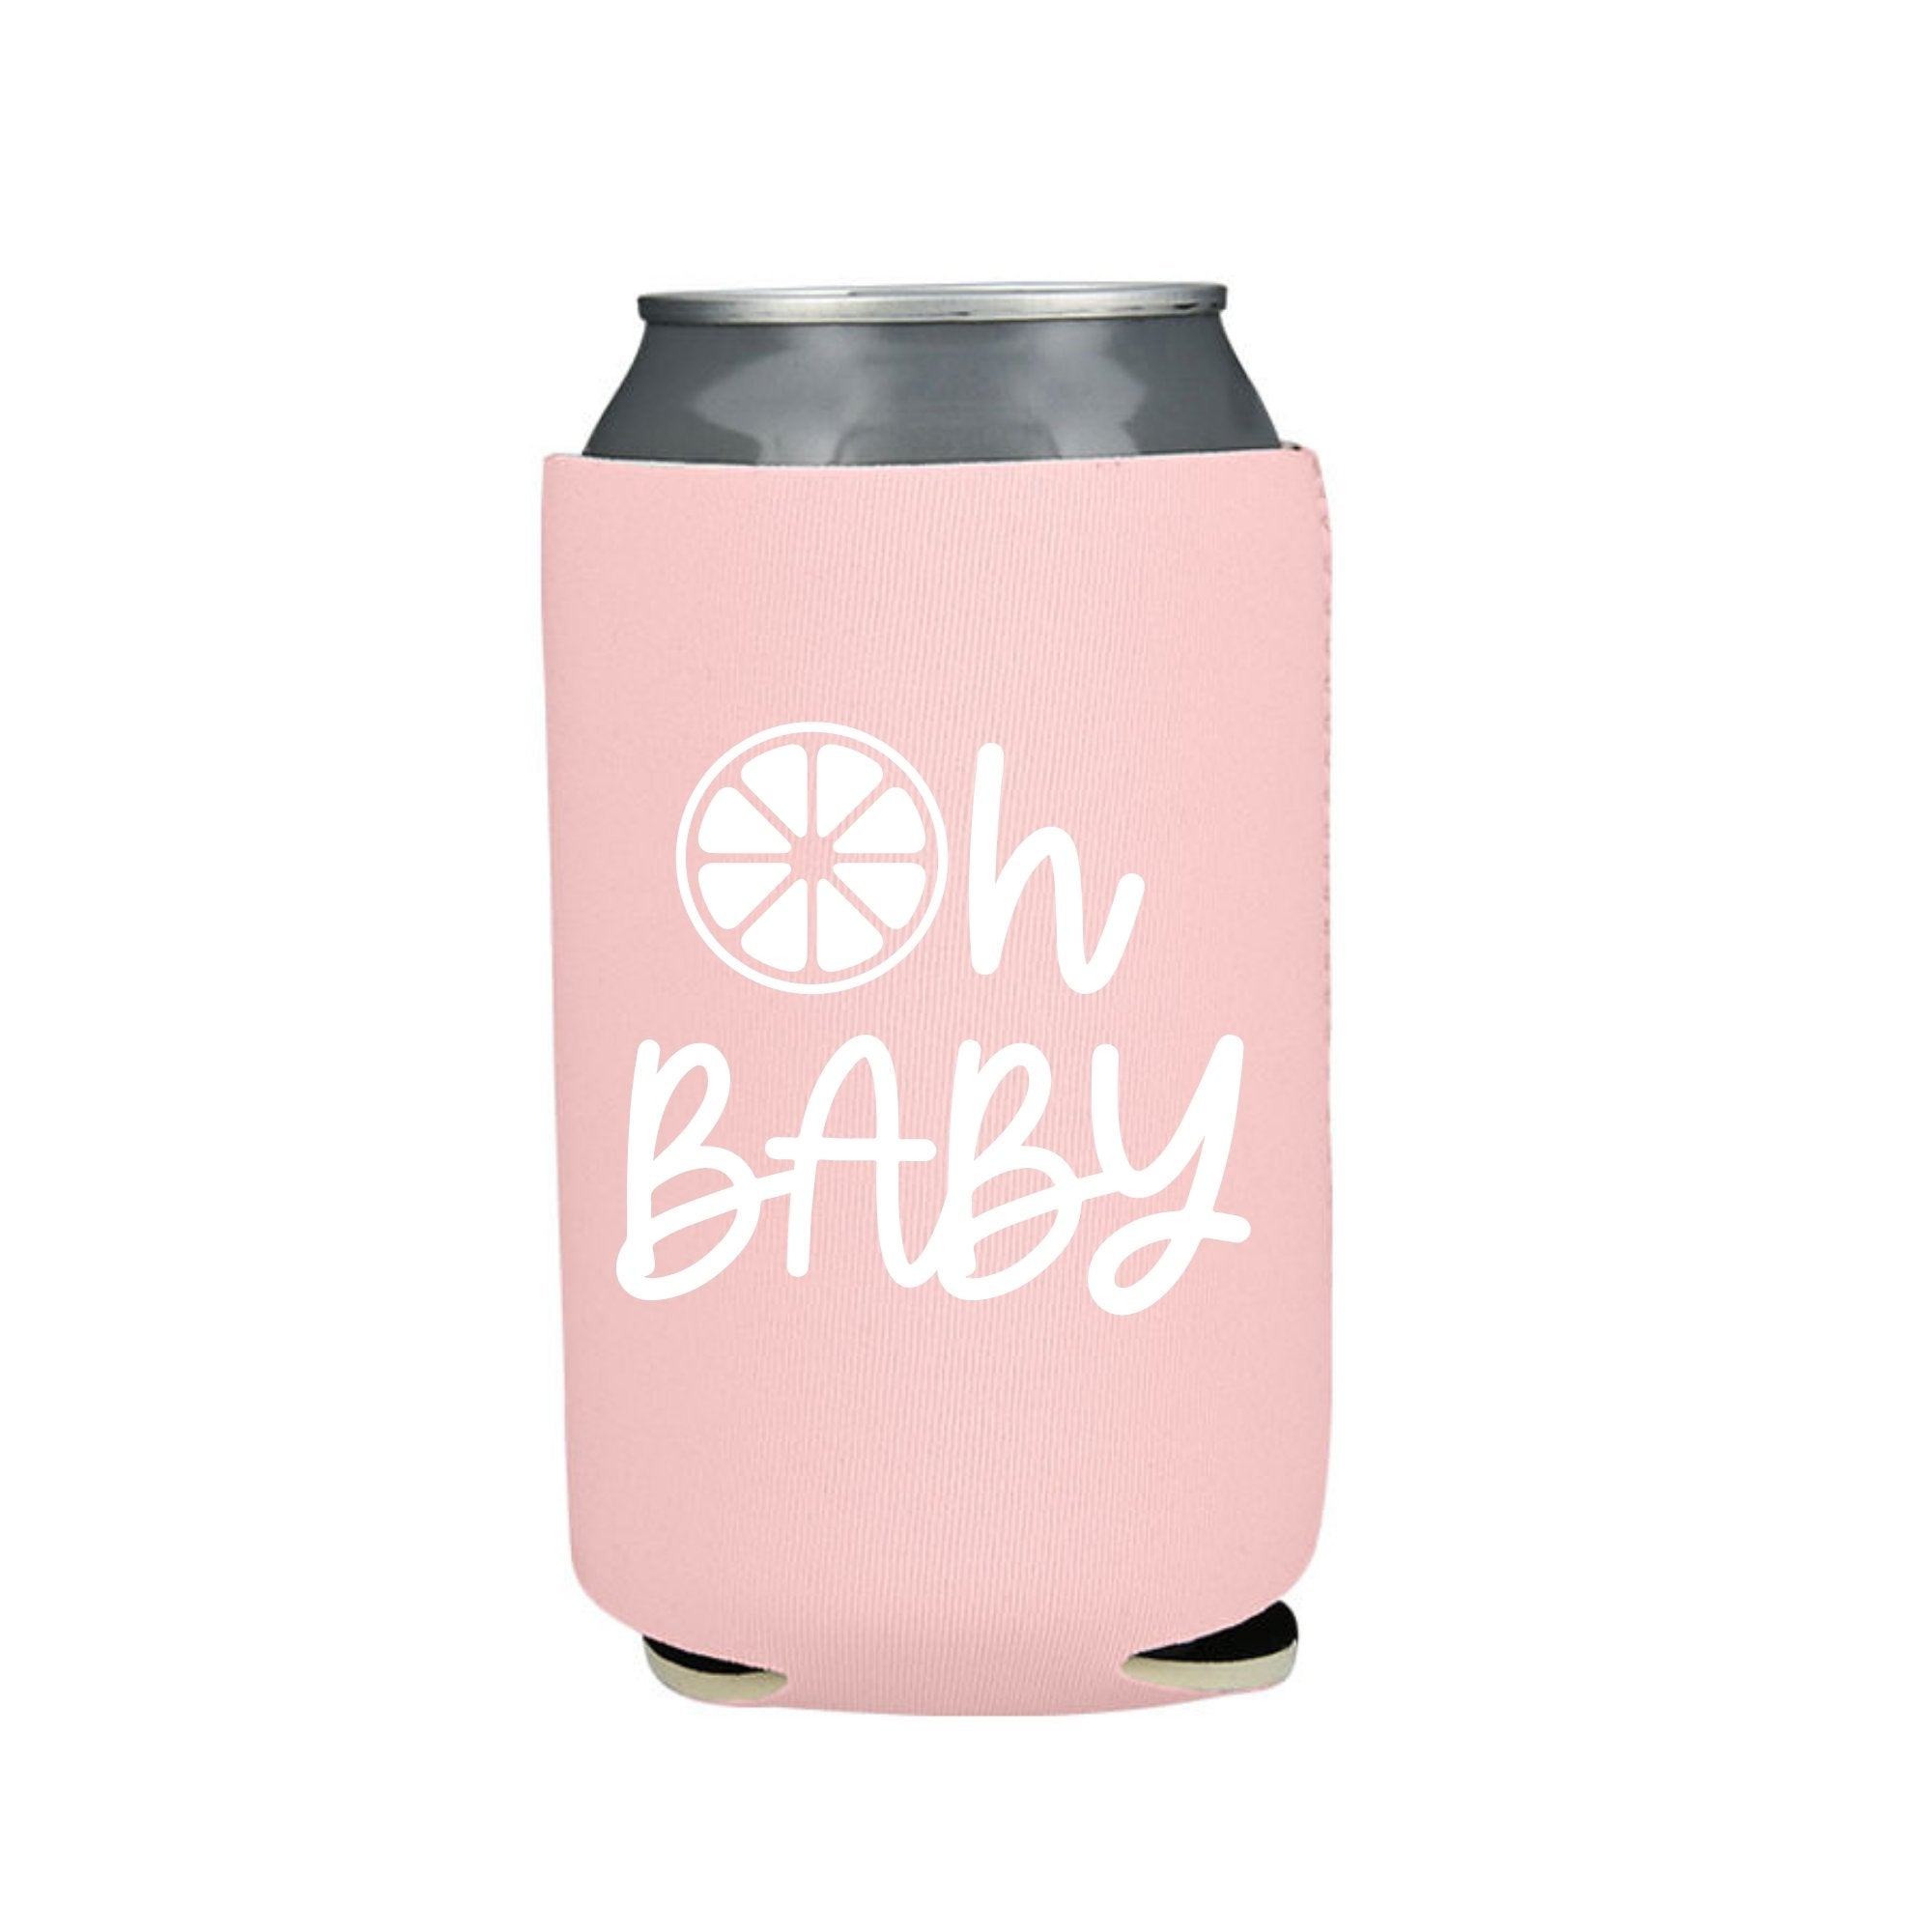 A pink can cooler reads "Oh Baby" on the front with the "O" as a lemon slice